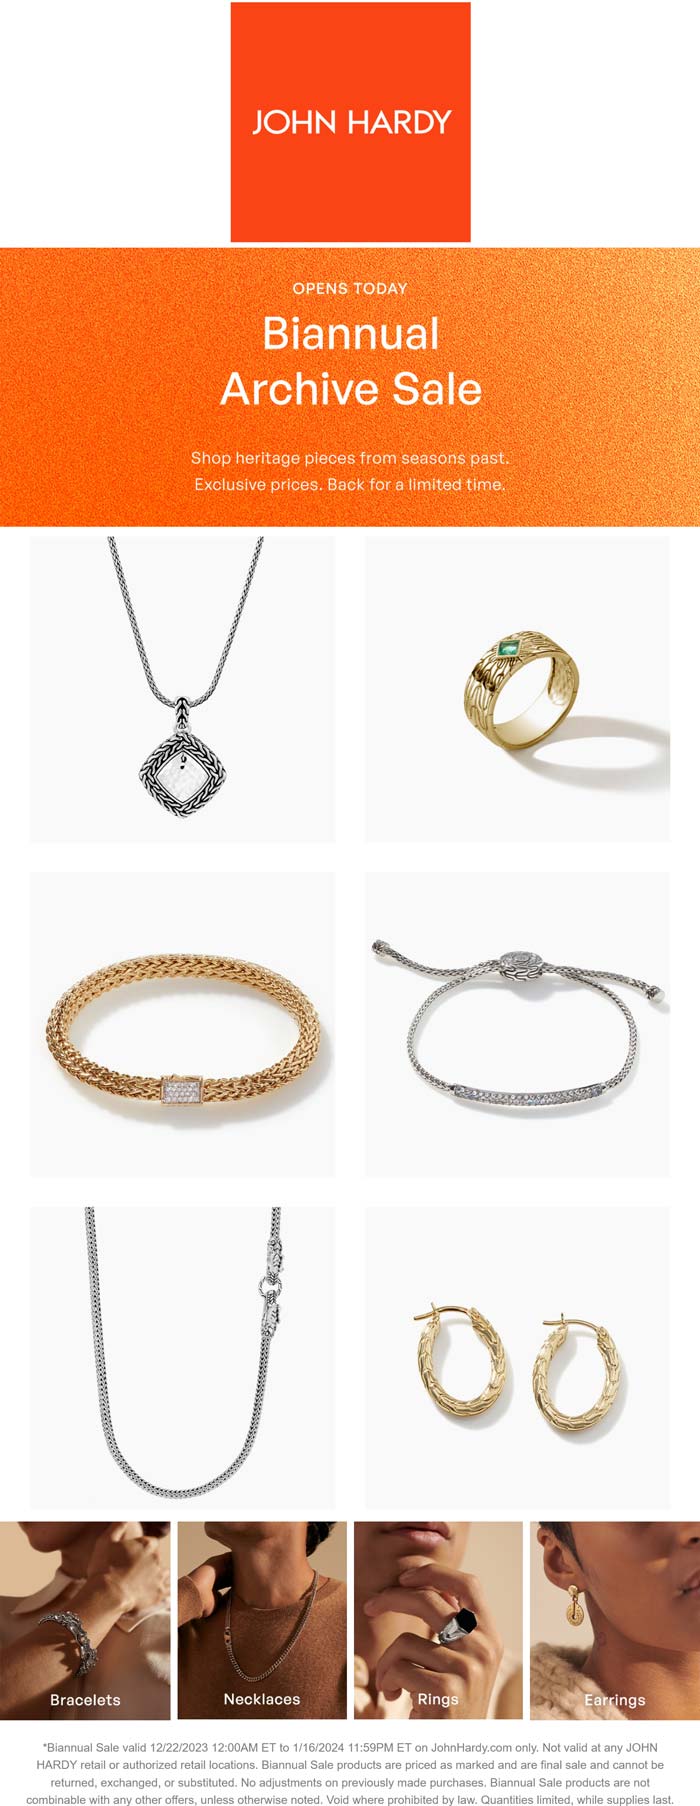 JOHN HARDY stores Coupon  Biannual jewelry clearance deals online at JOHN HARDY #johnhardy 